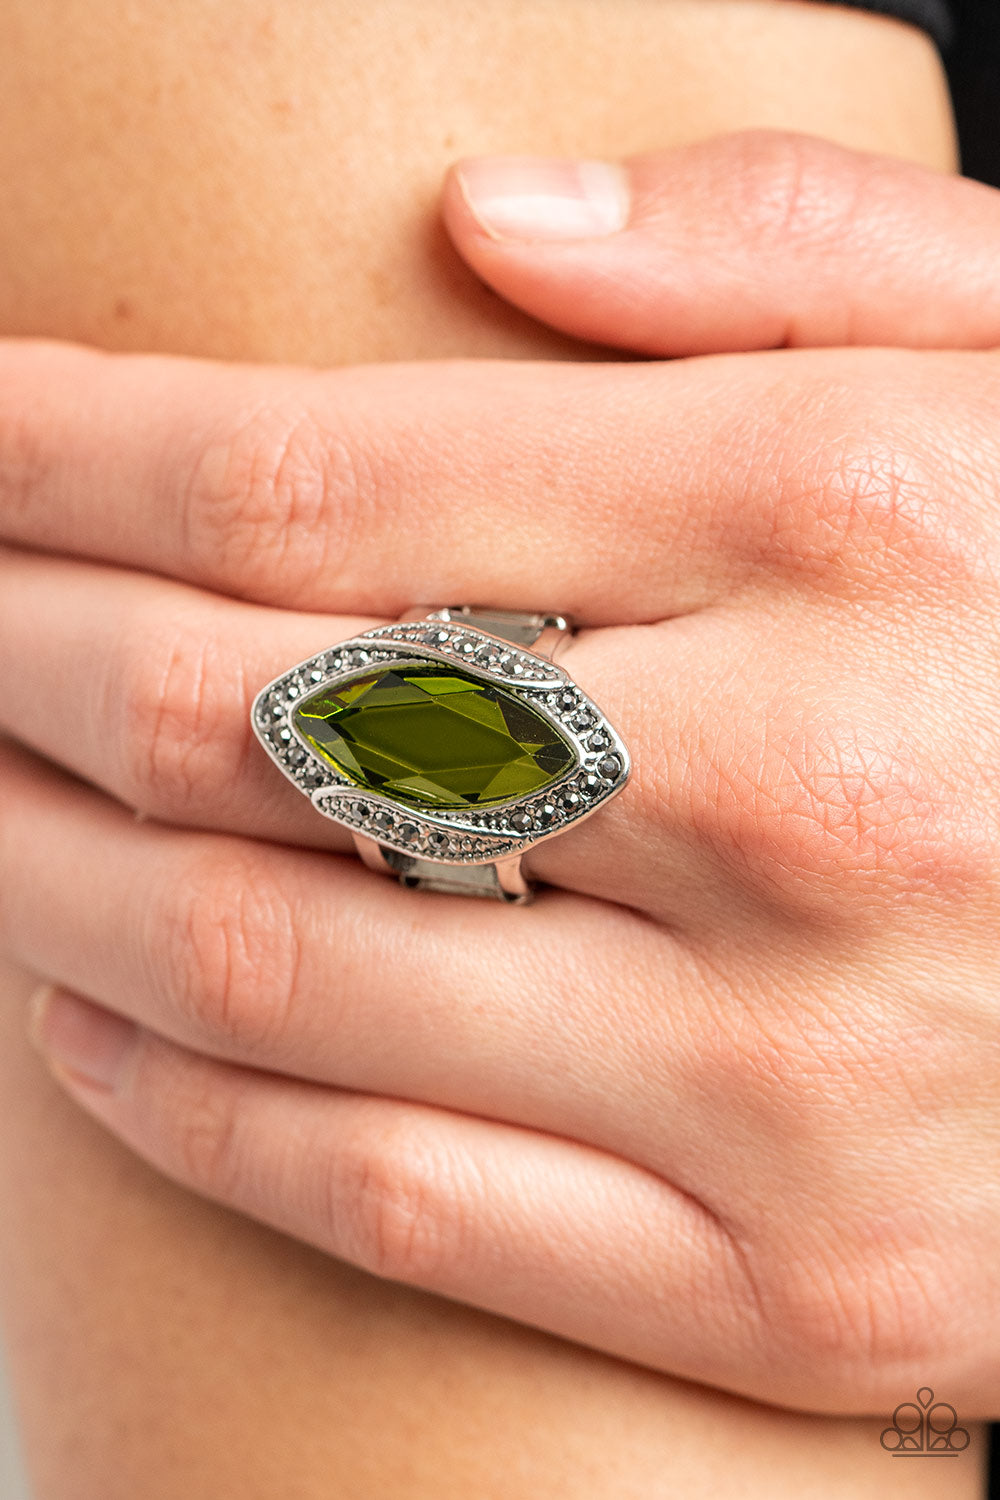 Paparazzi Accessories Let Me Take a REIGN Check - Green Dotted in dainty hematite rhinestones, folds of silver gather around an oversized marquise cut green gem for a gritty display of glitter atop the finger. Features a stretchy band for a flexible fit.